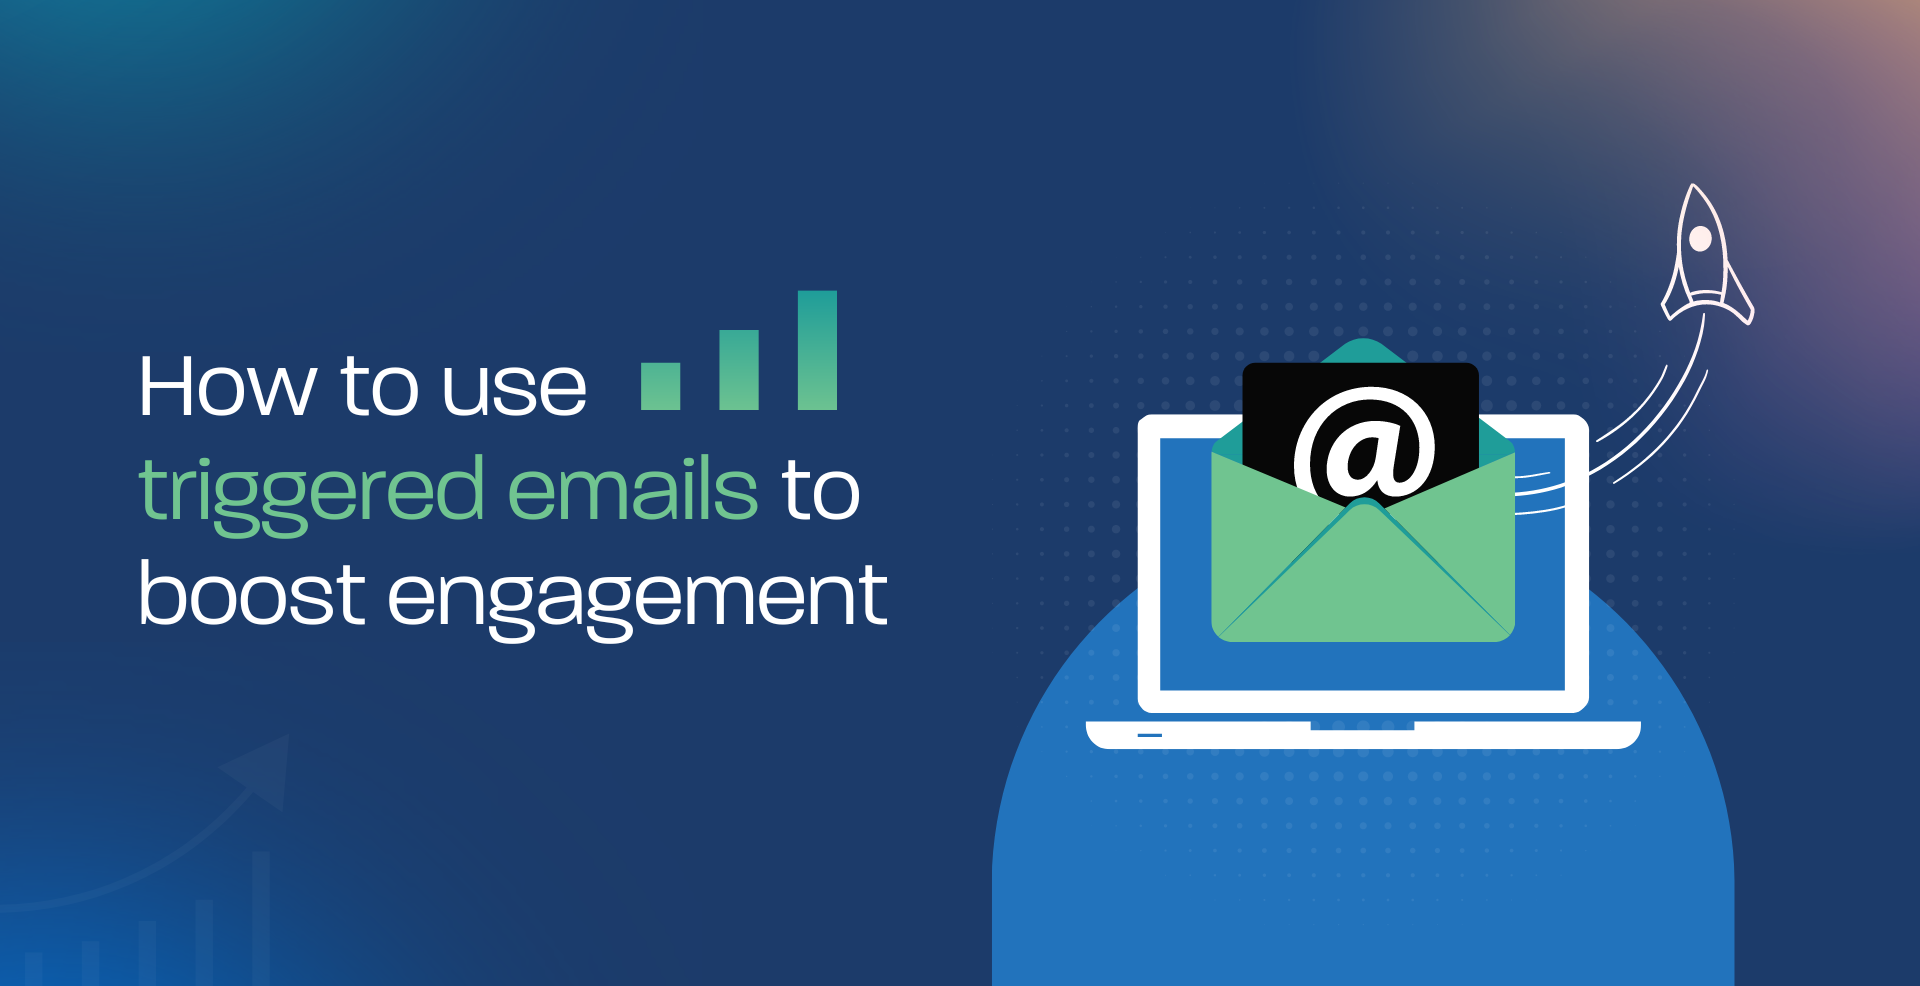 How to use triggered emails to boost engagement